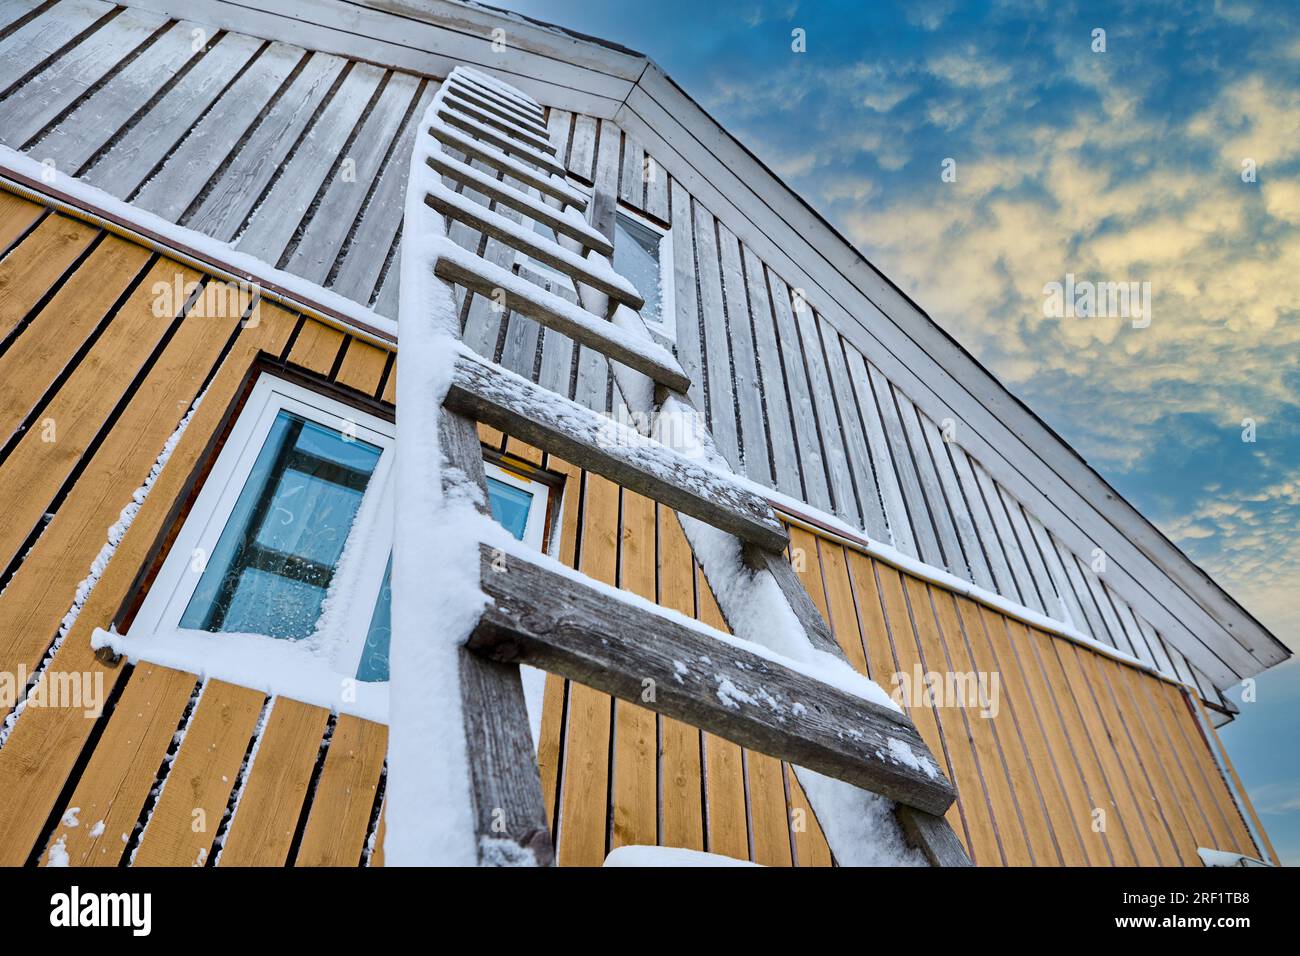 Wooden scaling ladder with steps is leaning against wall of wooden country house in winter. Stock Photo